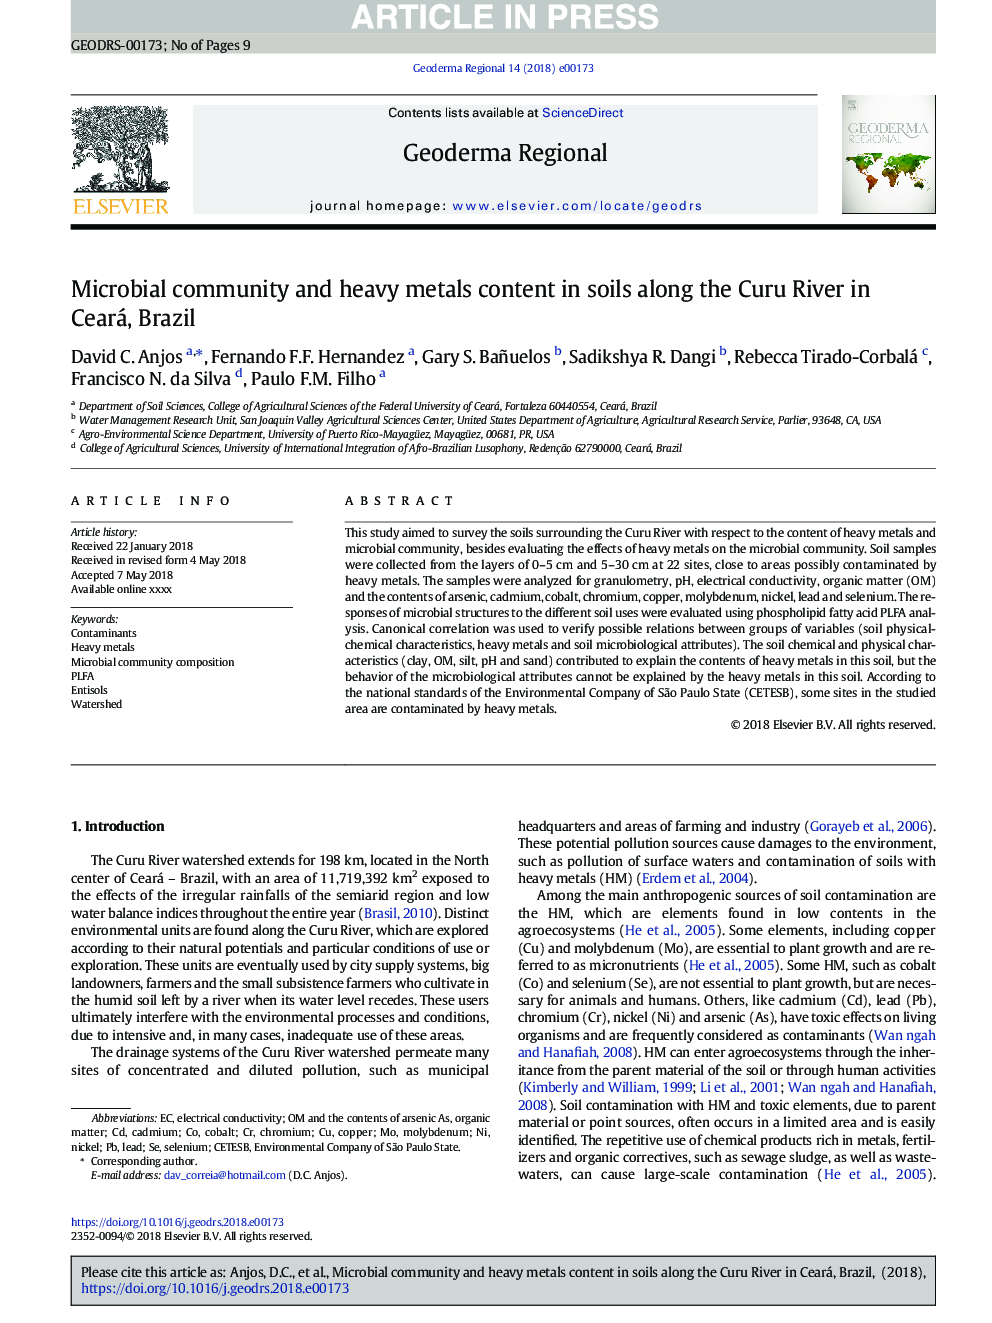 Microbial community and heavy metals content in soils along the Curu River in Ceará, Brazil